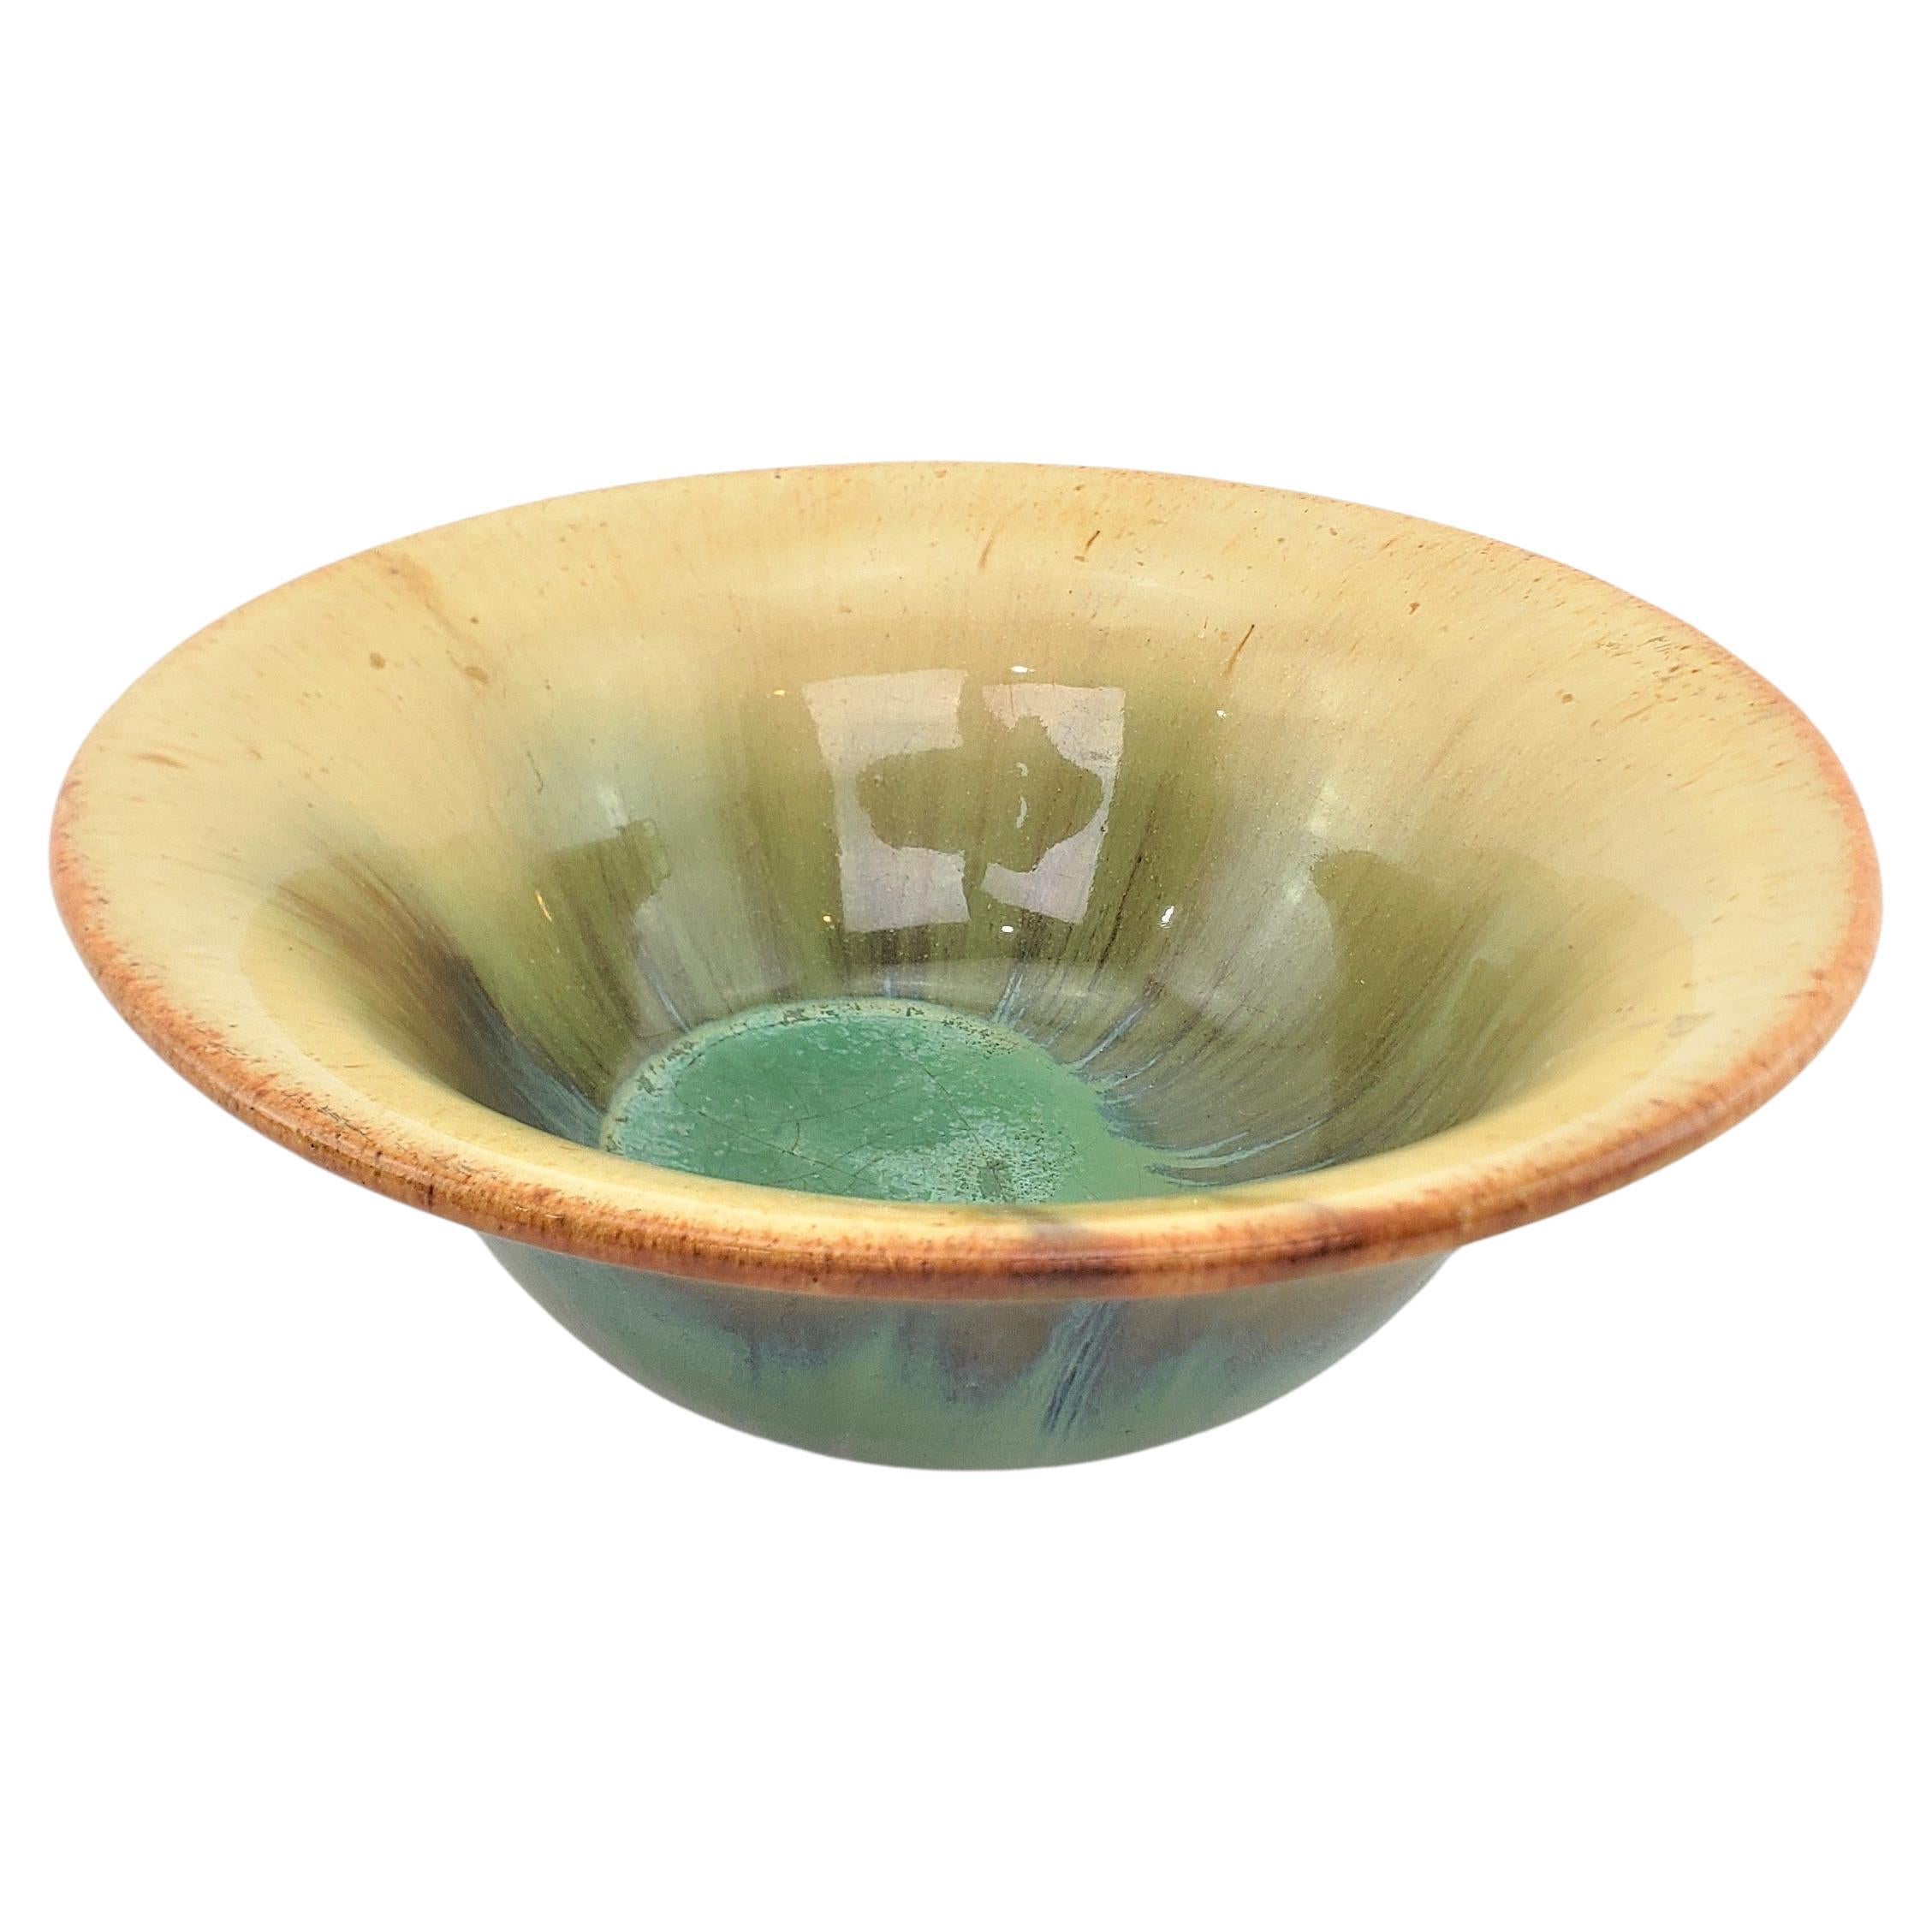 Antique Fulper Art Pottery Bowl with Blue, Green & Turquoise Glaze For Sale